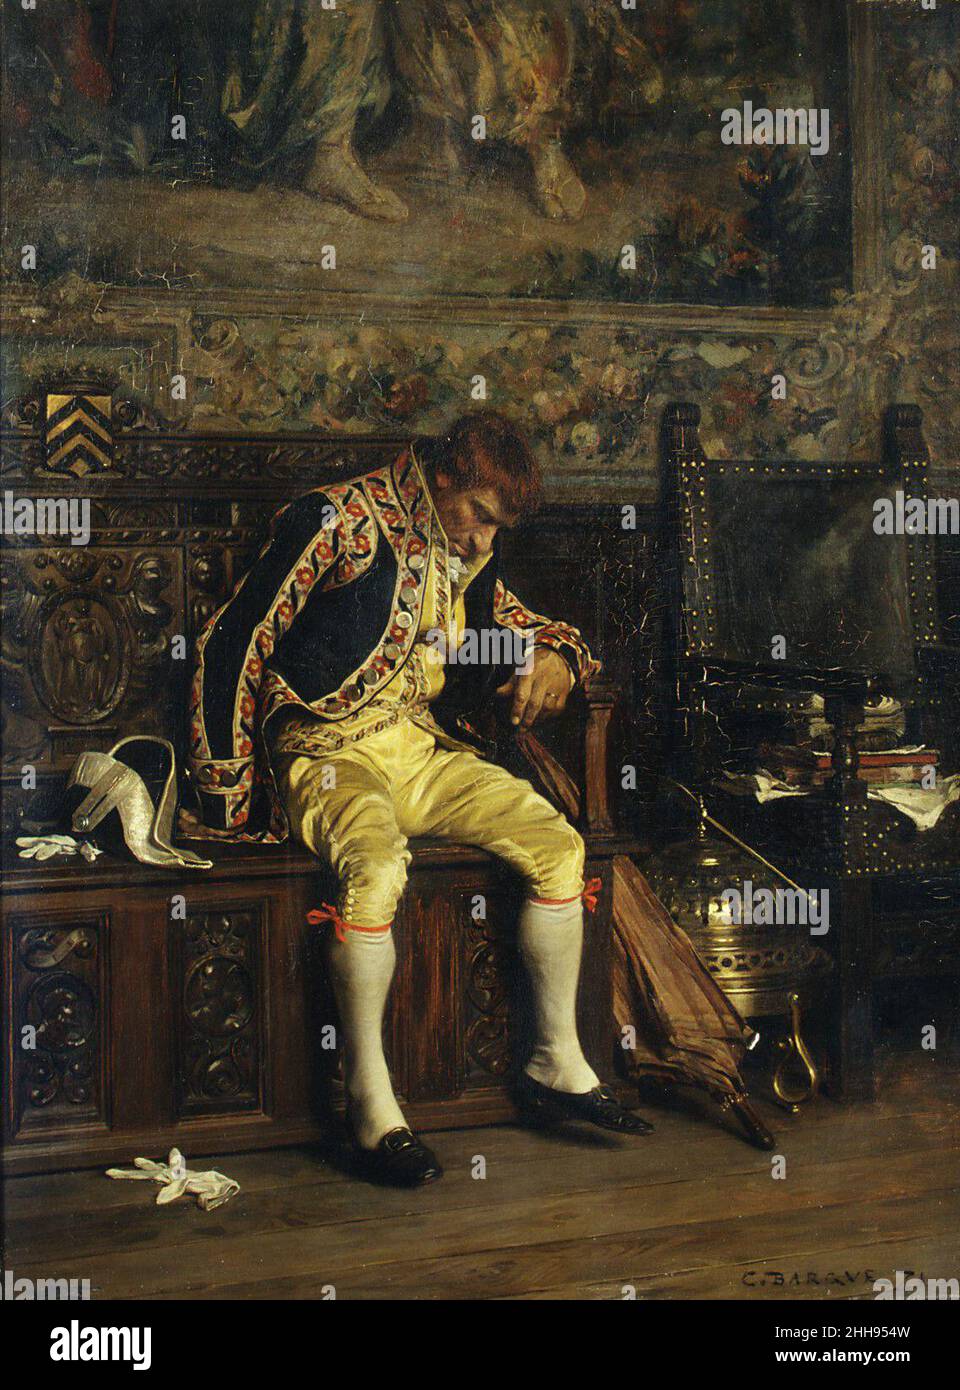 A Footman Sleeping 1871 Charles Bargue French. A Footman Sleeping. Charles Bargue (French, Paris 1825/26–1883 Paris). 1871. Oil on wood. Paintings Stock Photo